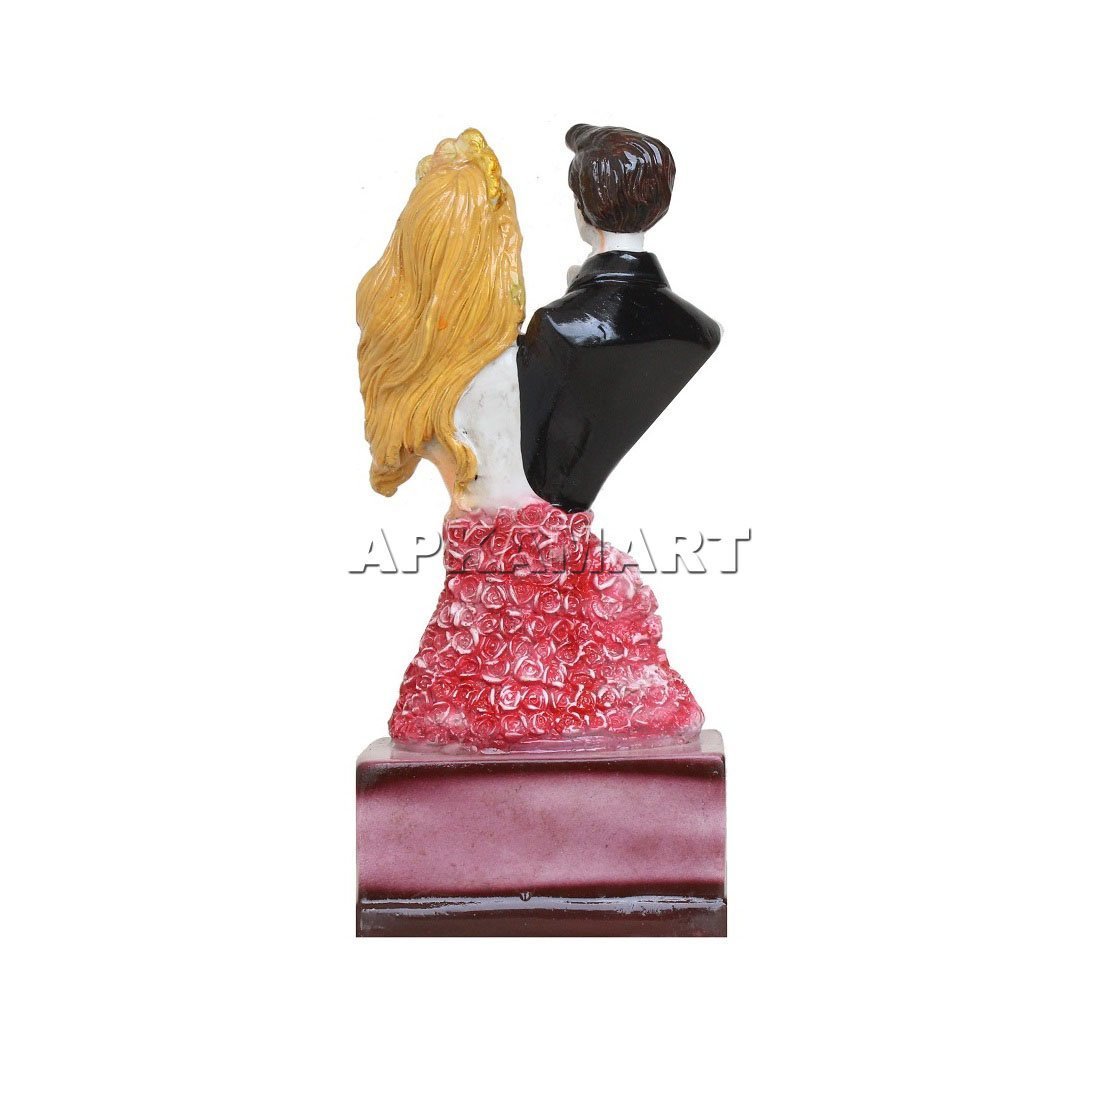 Buy ELEGANT LIFESTYLE Romantic Kiss Couple Statue with Light for Home Decor  Gift Ideal Valentine Day, Wedding Parties Gift, Loving Romantic Bedroom  Night Lamp & Decorative Showpiece - 14 cm Online at